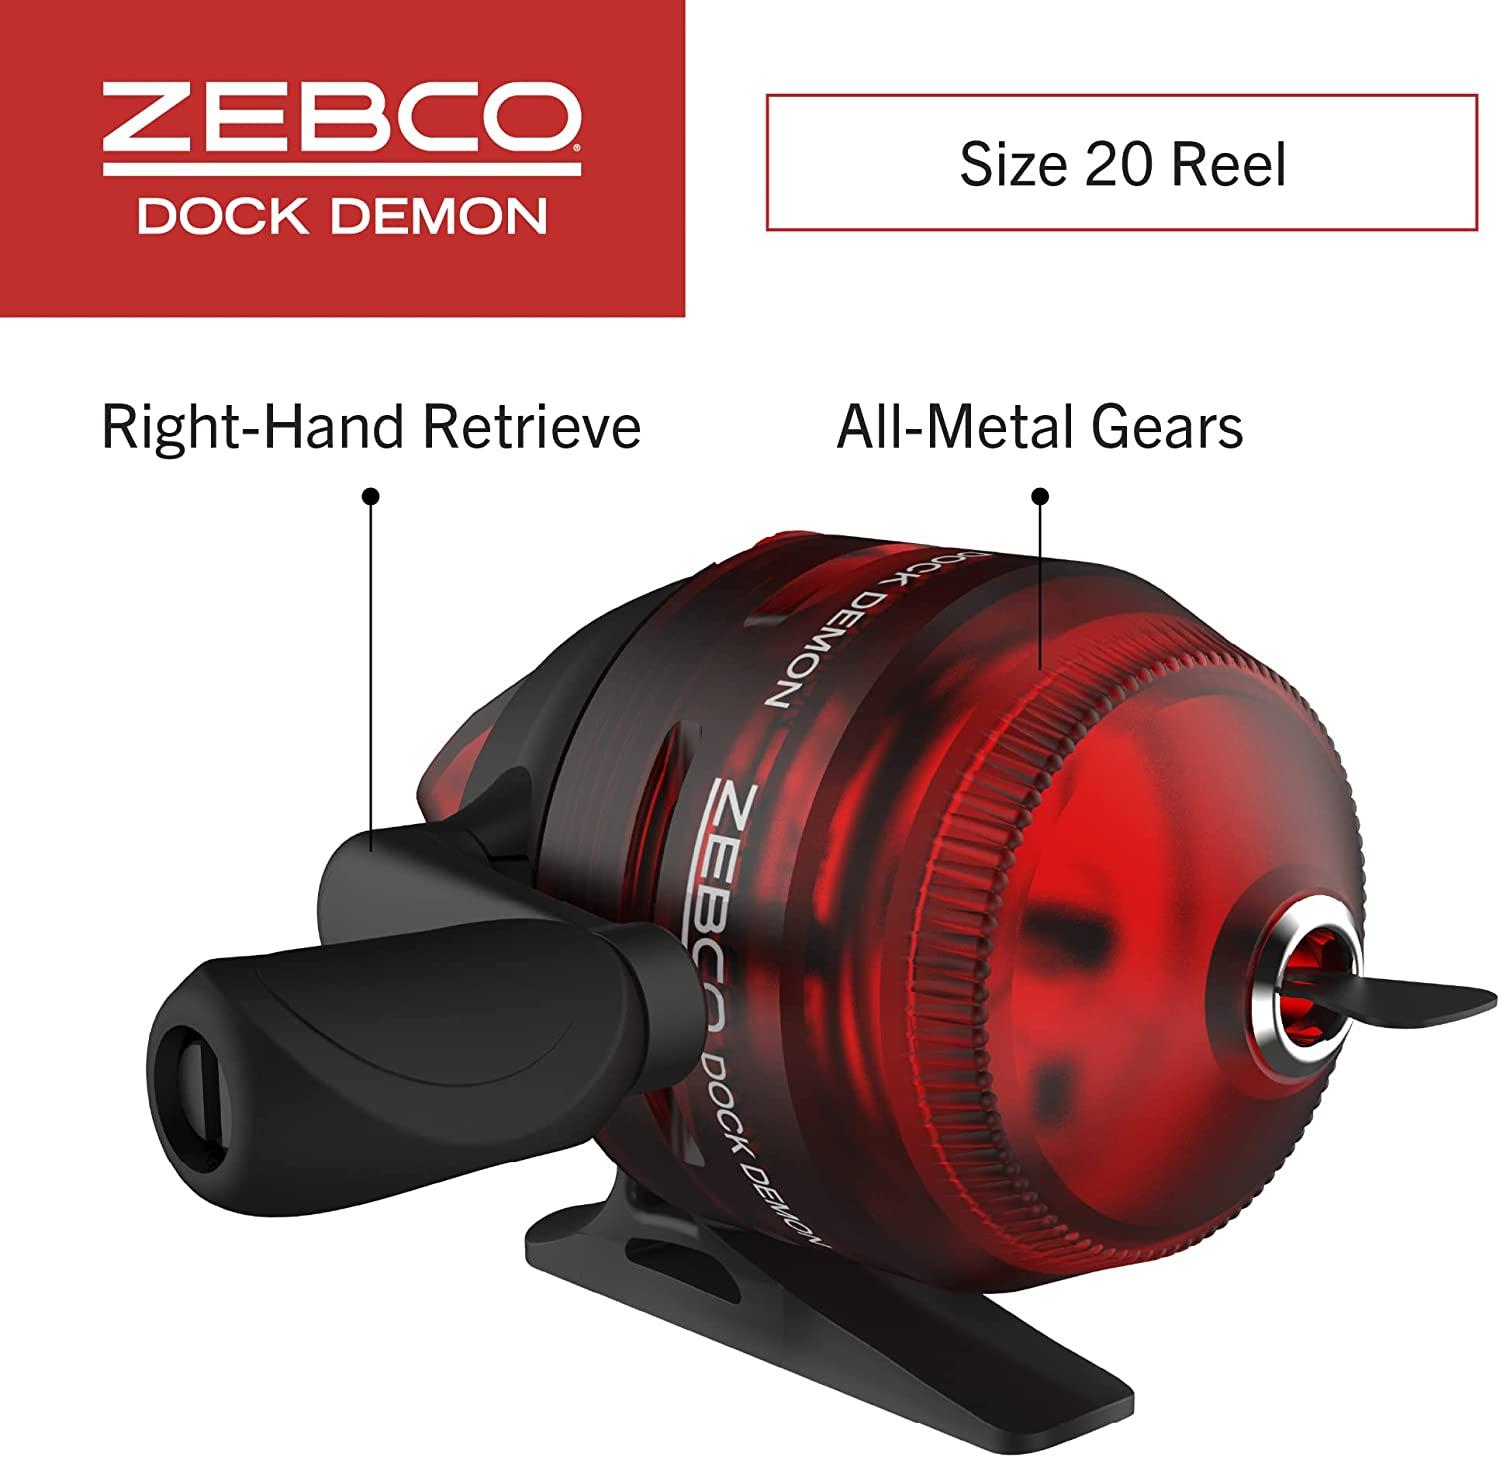 Zebco Dock Demon Spinning Reel or Spincast Reel and Fishing